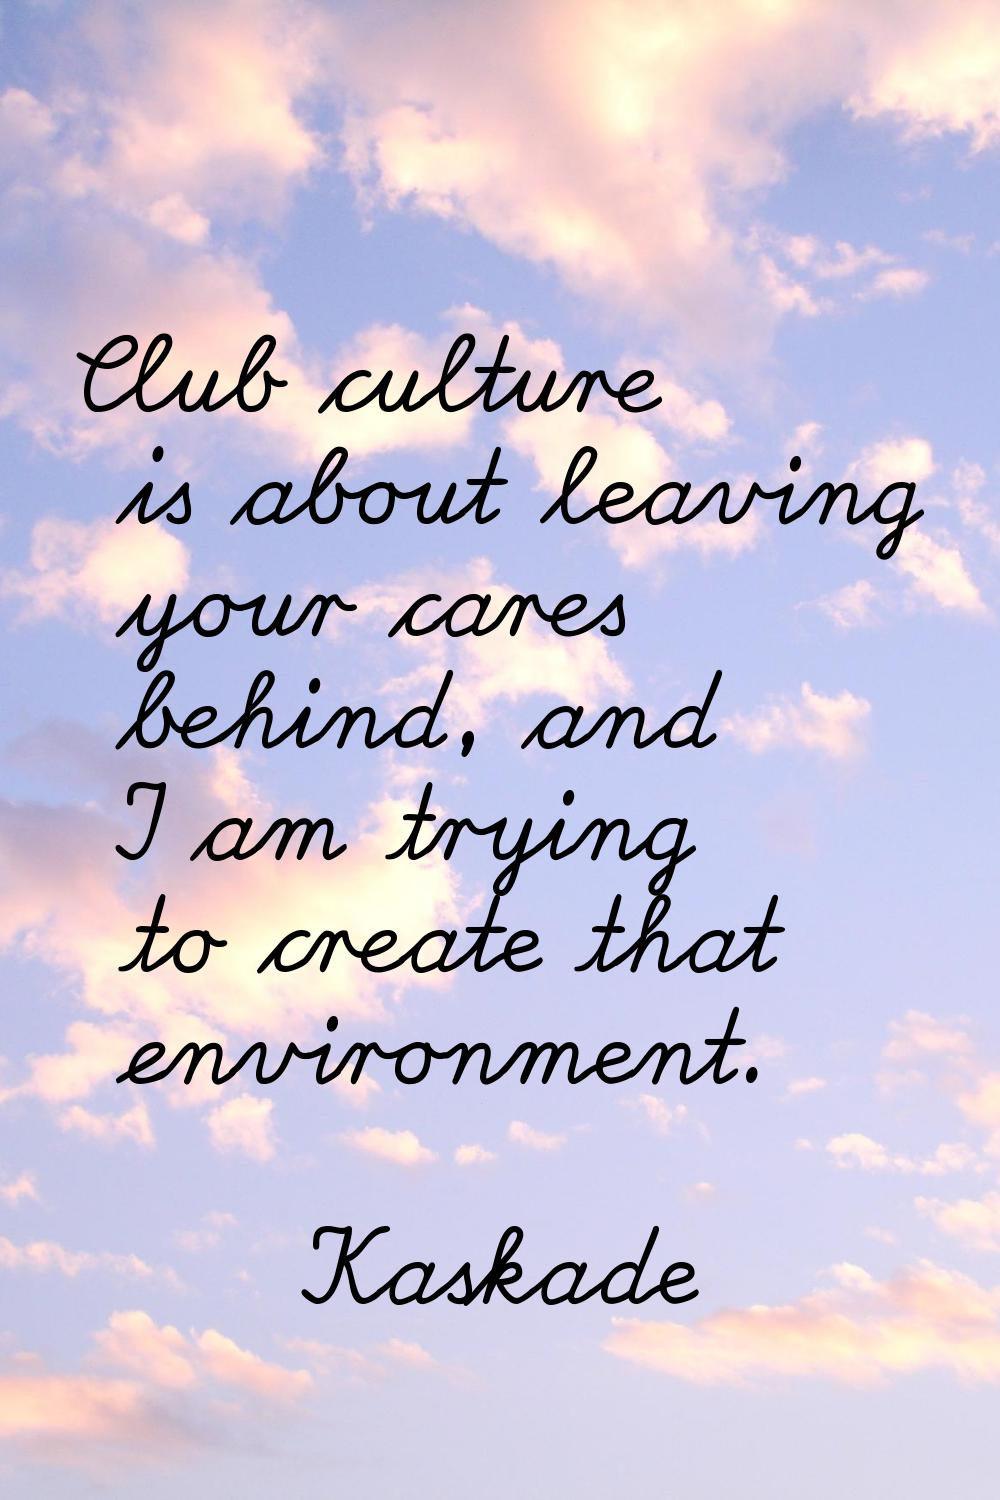 Club culture is about leaving your cares behind, and I am trying to create that environment.